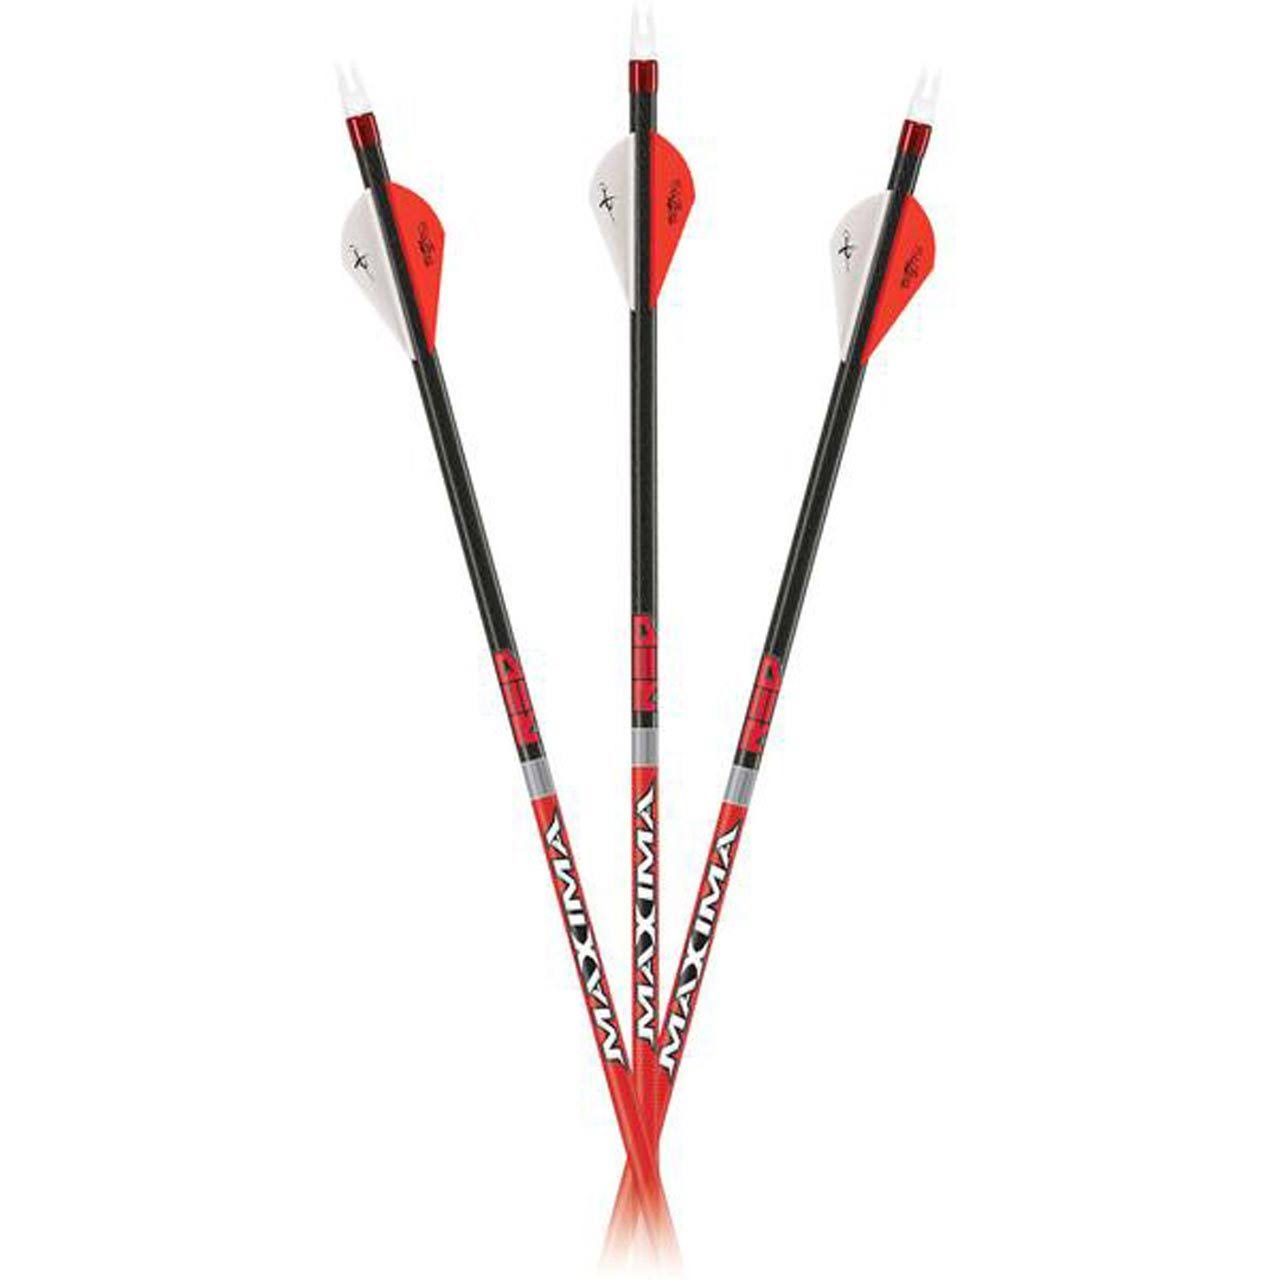 Carbon Express Maxima Red Fletched Carbon Arrows - Set of 6